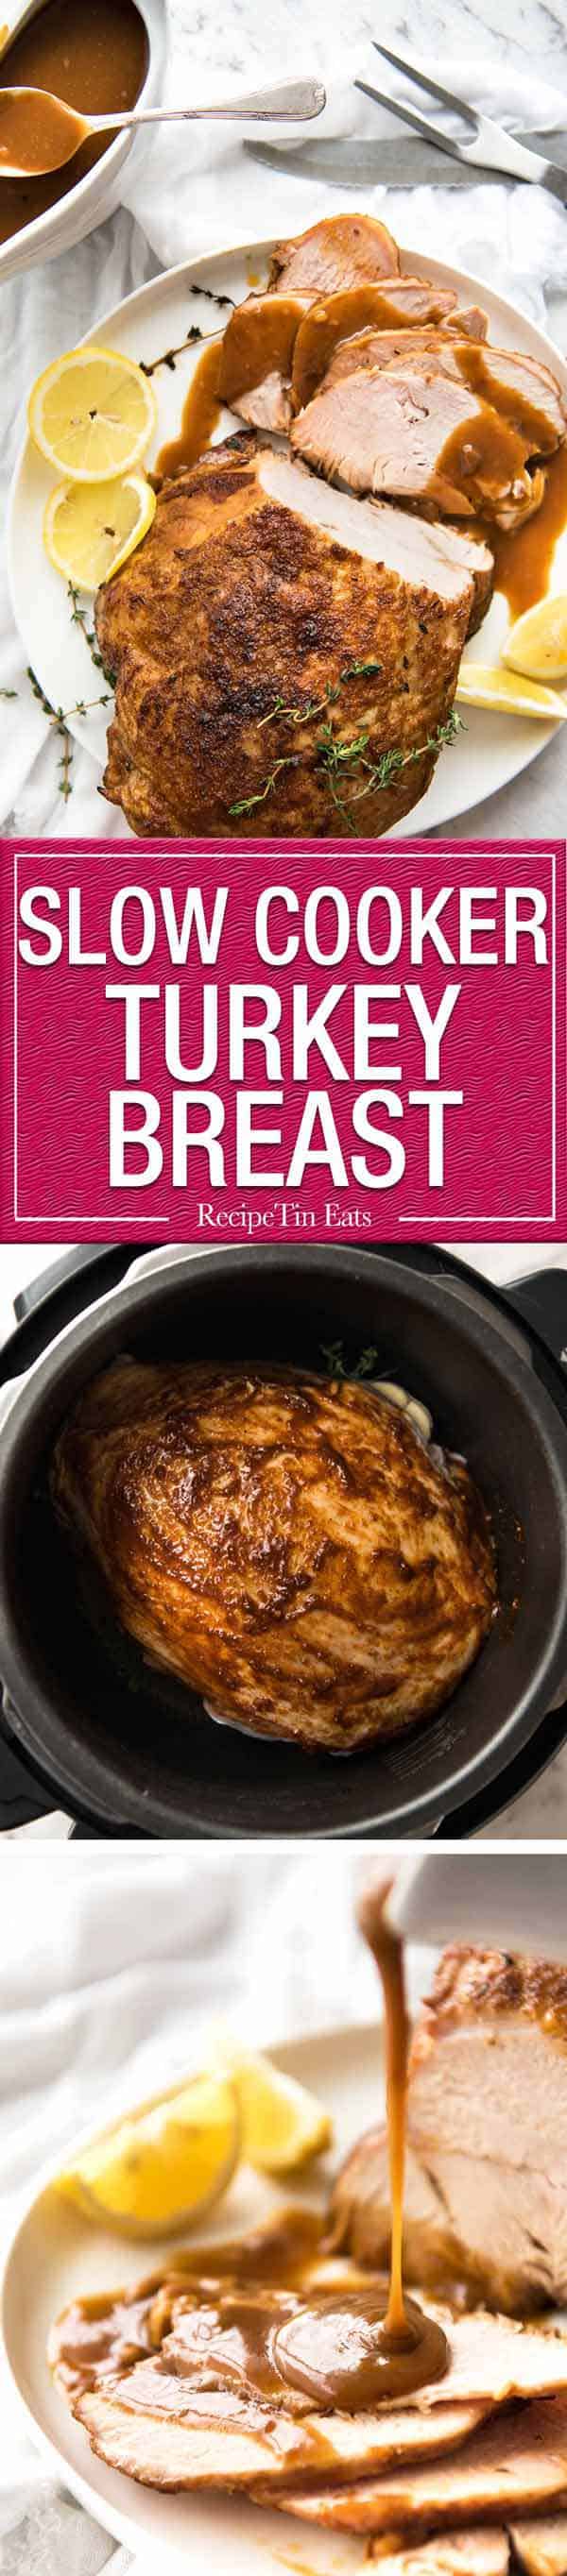 Slow Cooker Turkey Breast with Gravy - the easiest and safest way to make juicy turkey breast without brining! recipetineats.com